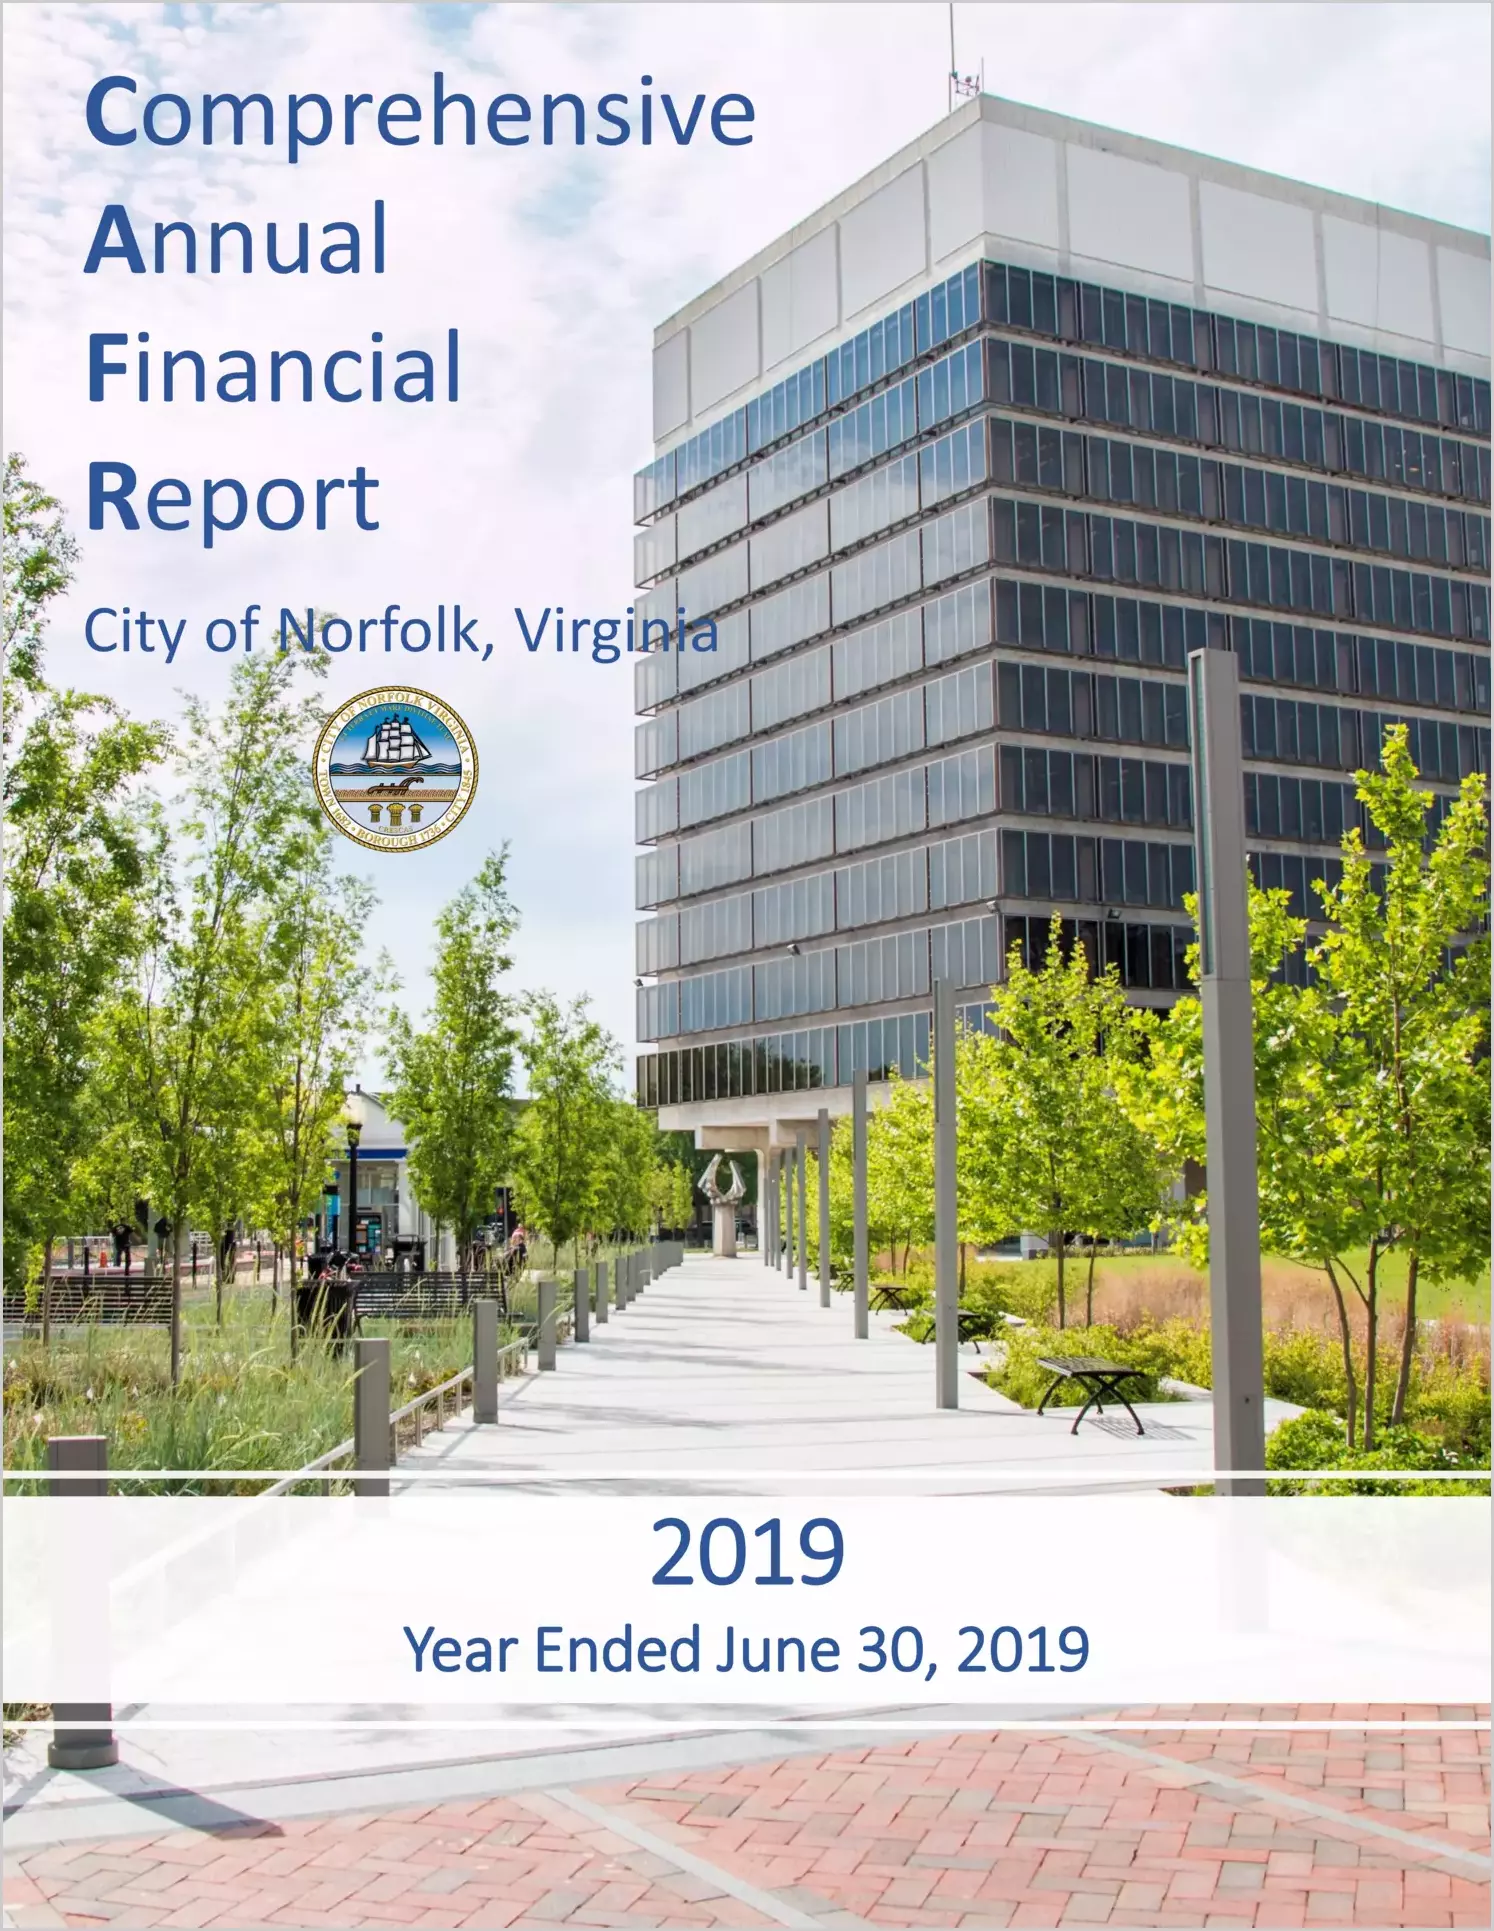 2019 Annual Financial Report for City of Norfolk